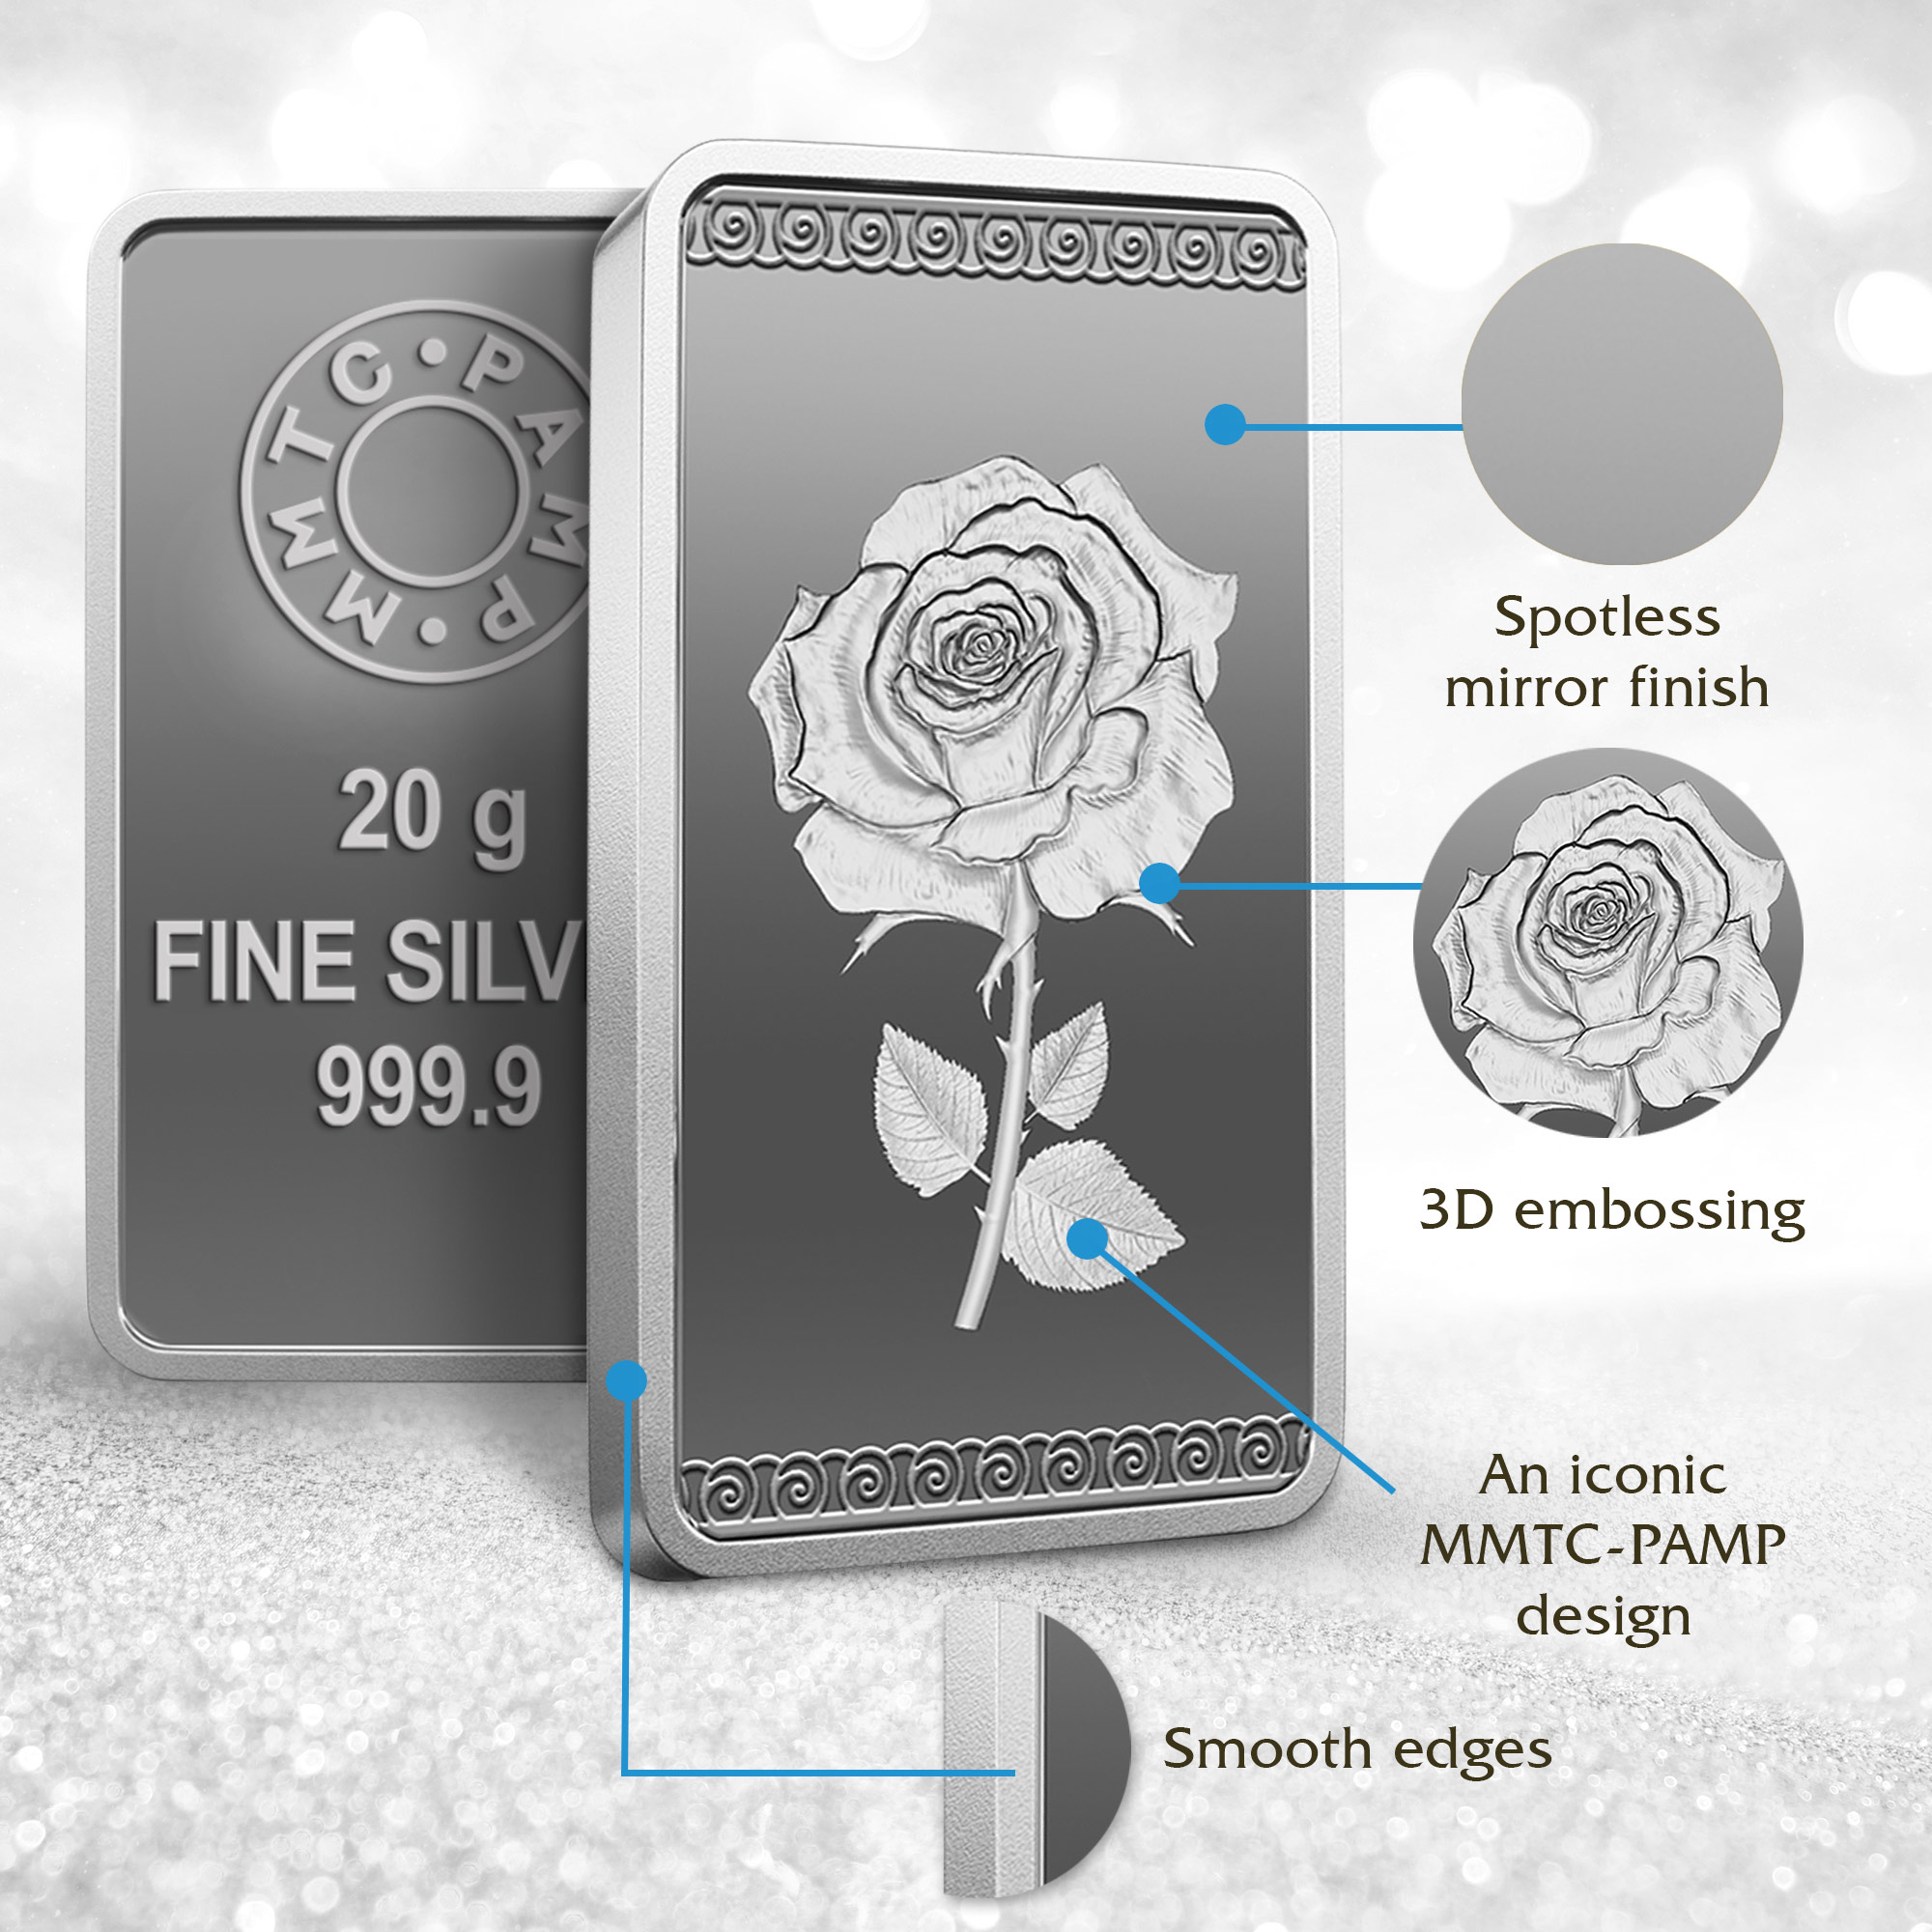 https://shop.mmtcpamp.com/ROSE (999.9) PURITY 20 GM SILVER BAR4